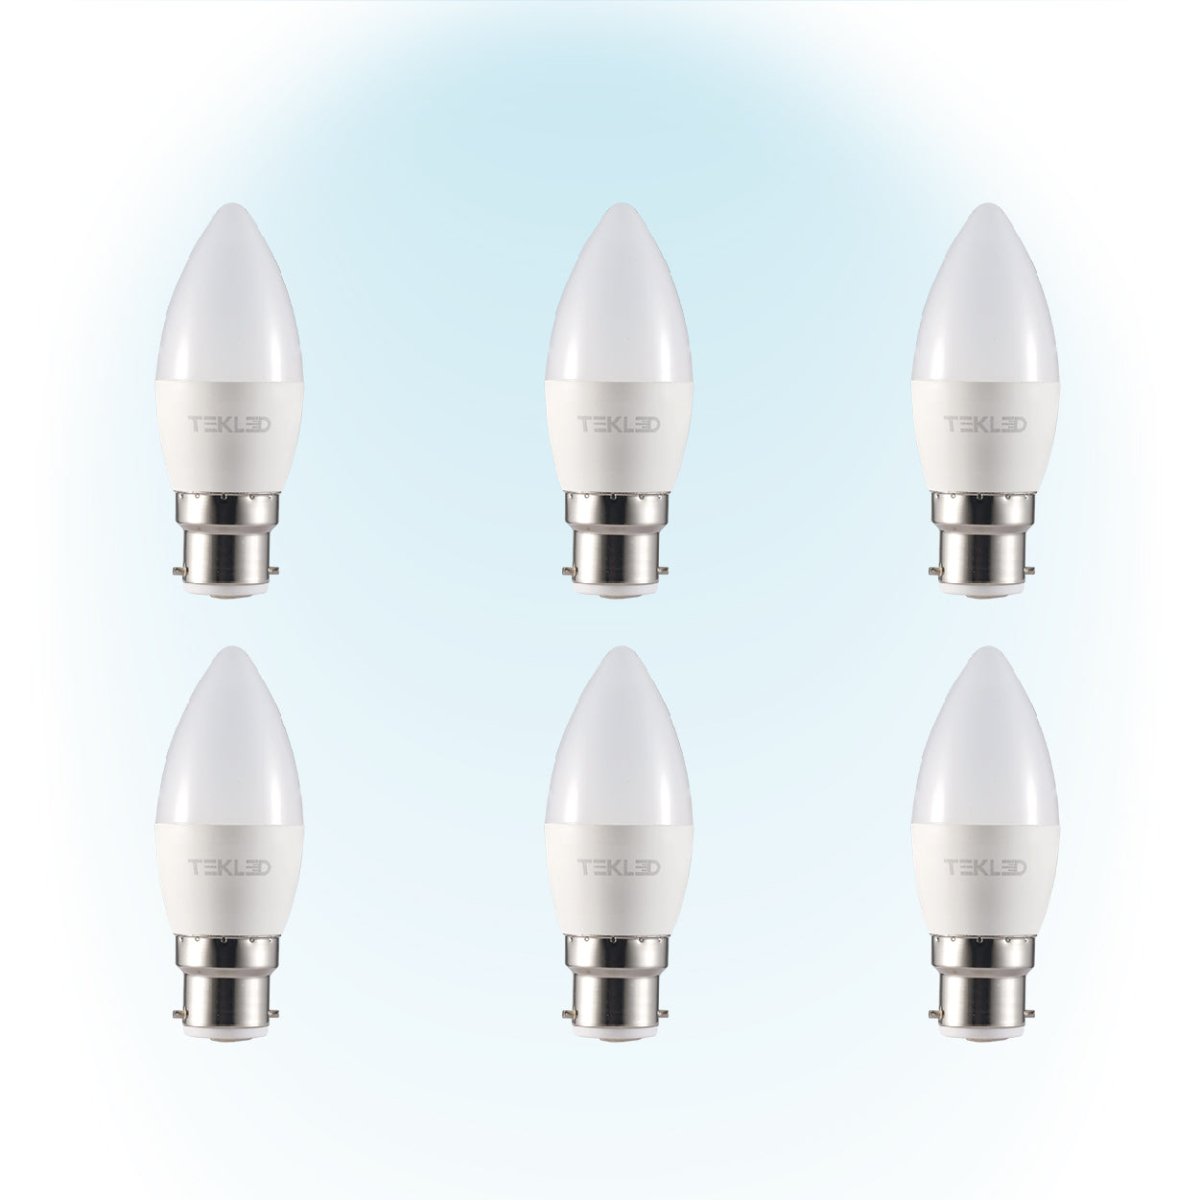 Cetus LED Candle Bulb C37 Dimmable B22 Bayonet Cap 6W Pack of 6 6000k cool daylight